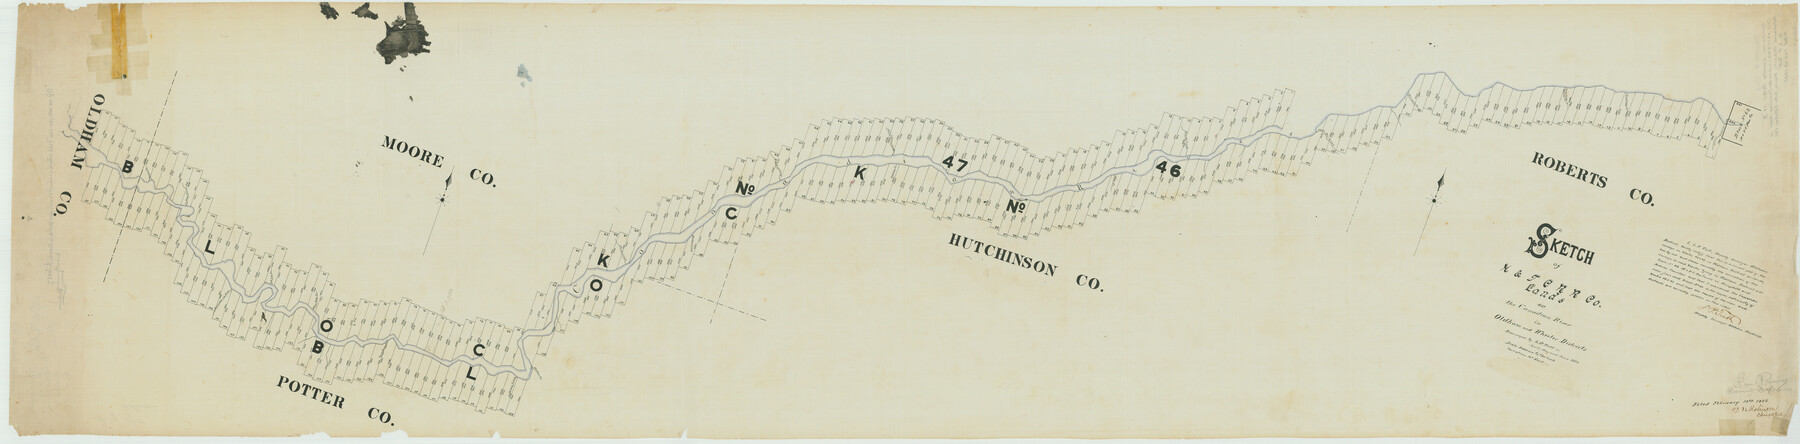 9243, Hutchinson County Rolled Sketch 3, General Map Collection